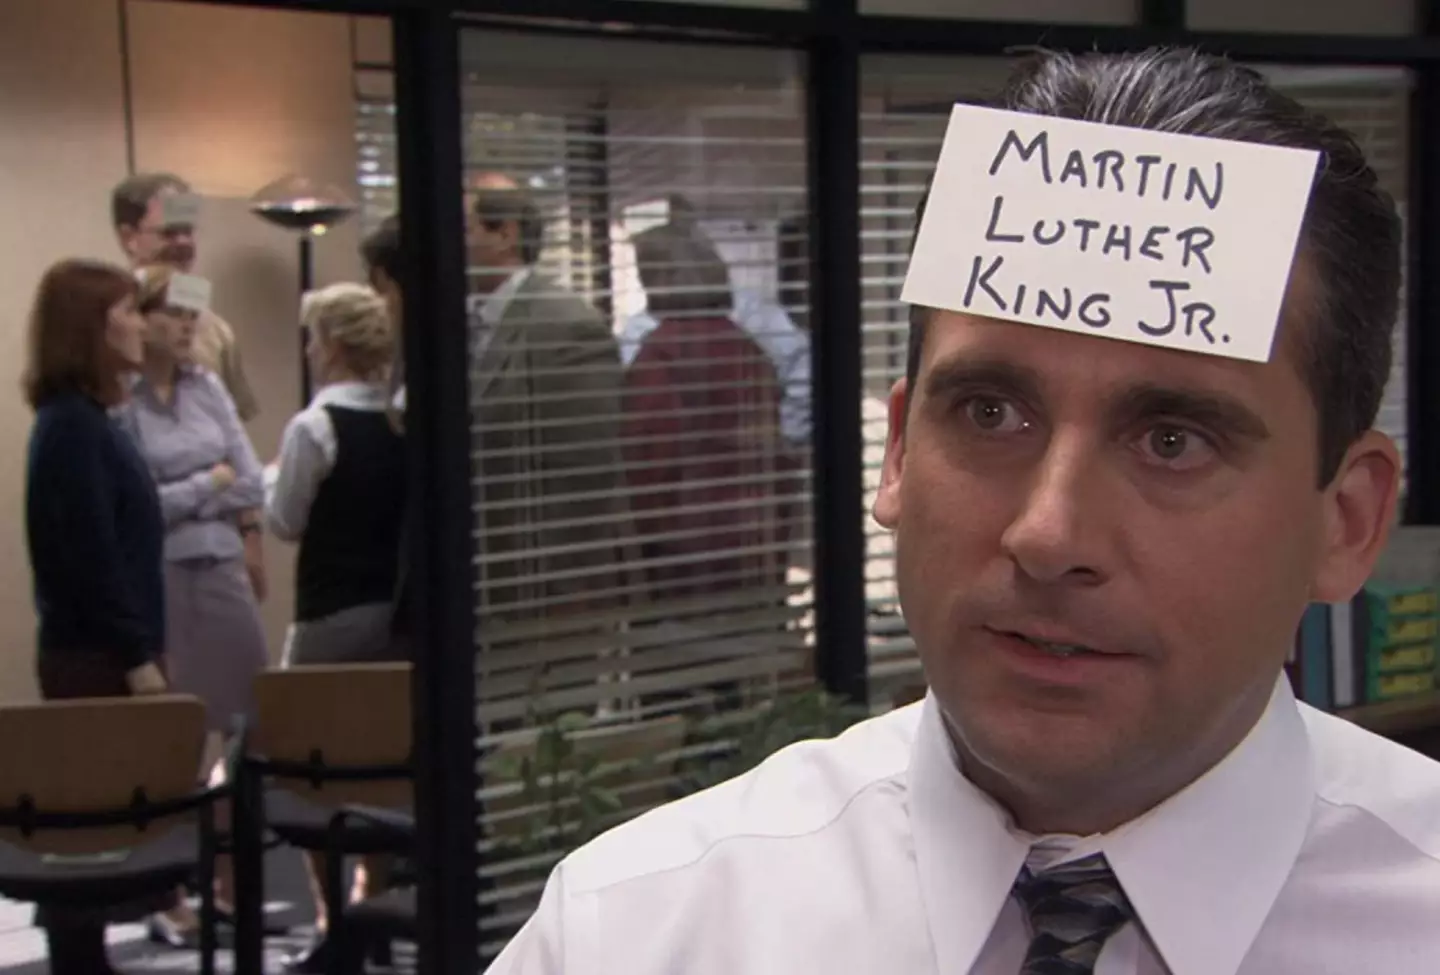 Krasinski has also shared his favourite episode of The Office.